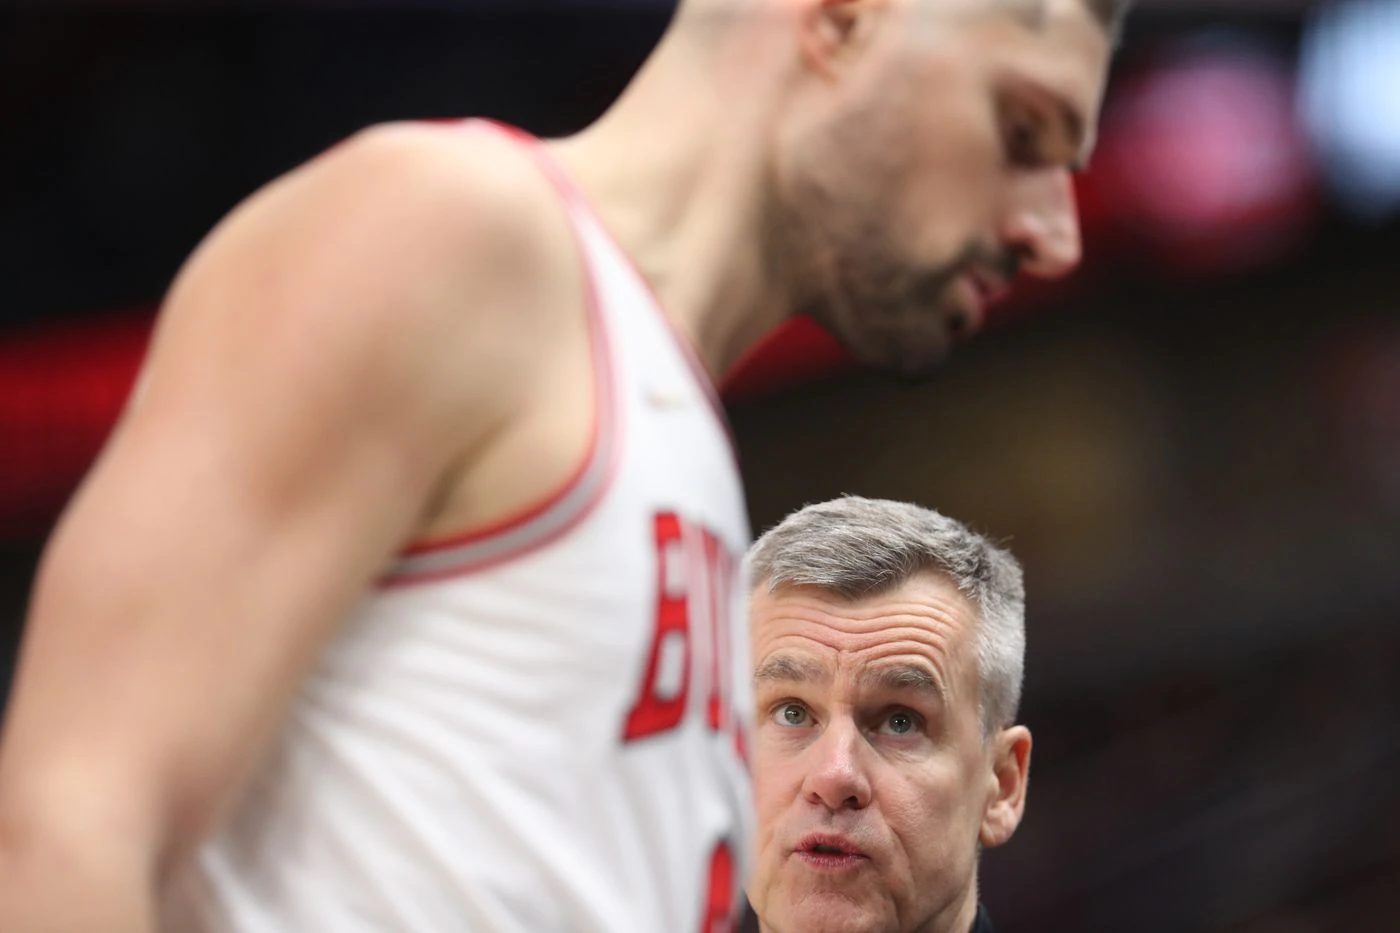 Chicago Bulls head coach Billy Donovan gives pointers to center Nikola Vucevic (9) in the third quarter against the Golden State Warriors at United Center on Jan. 14, 2022, in Chicago.